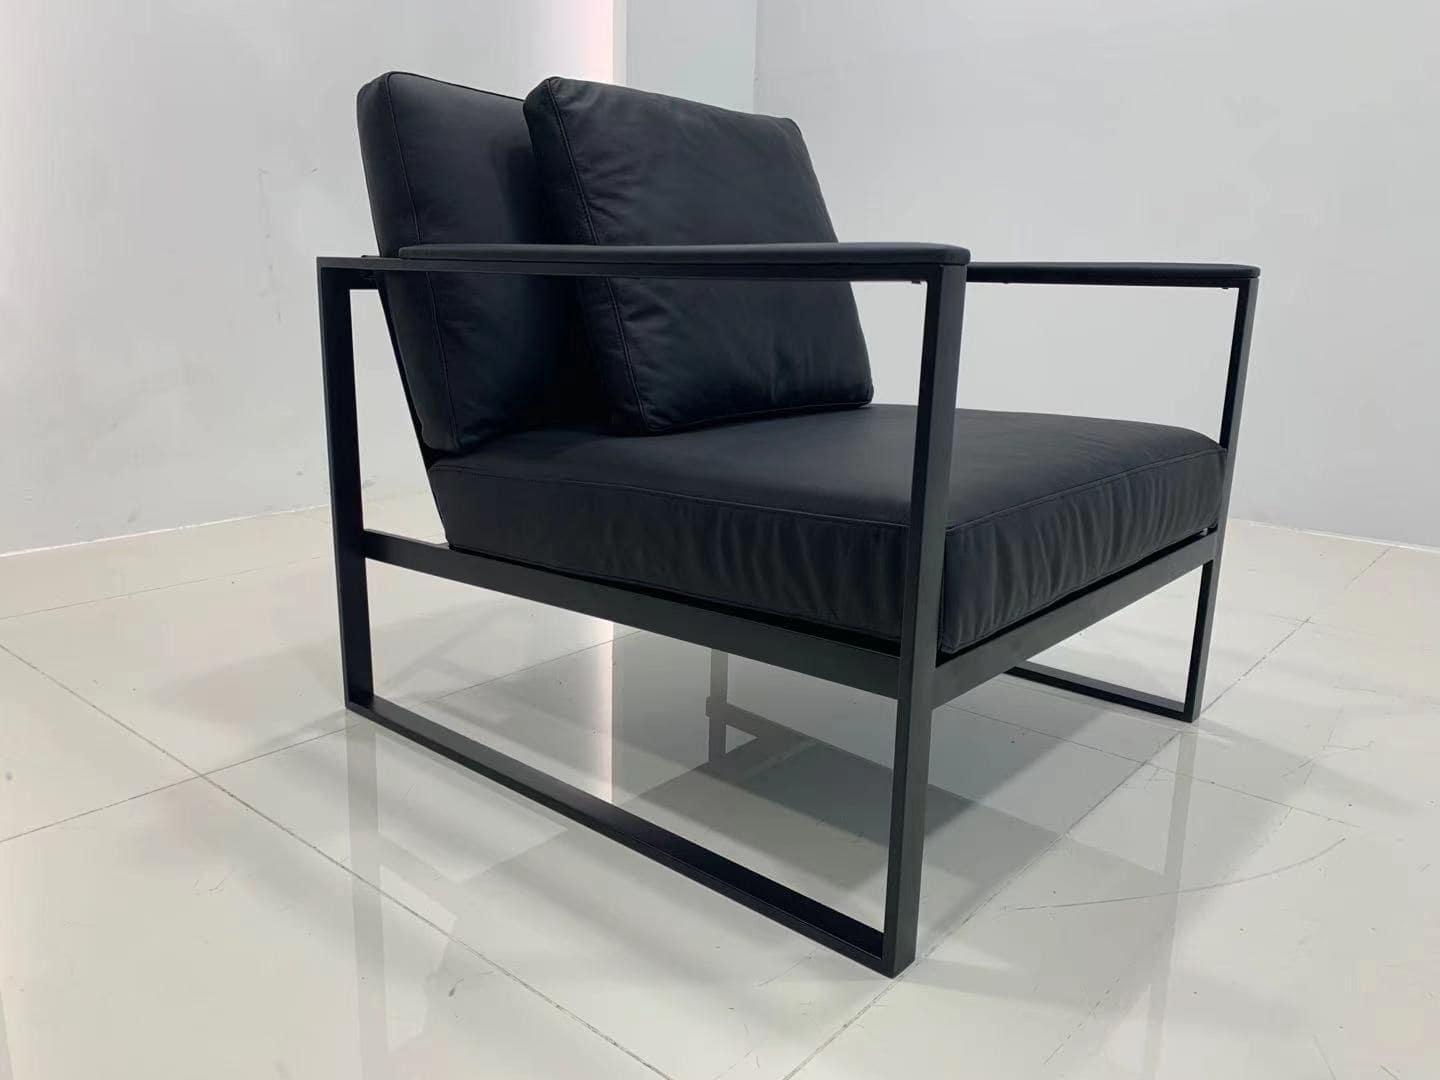 CUADRO METAL FRAME AND LEATHER CHAIR